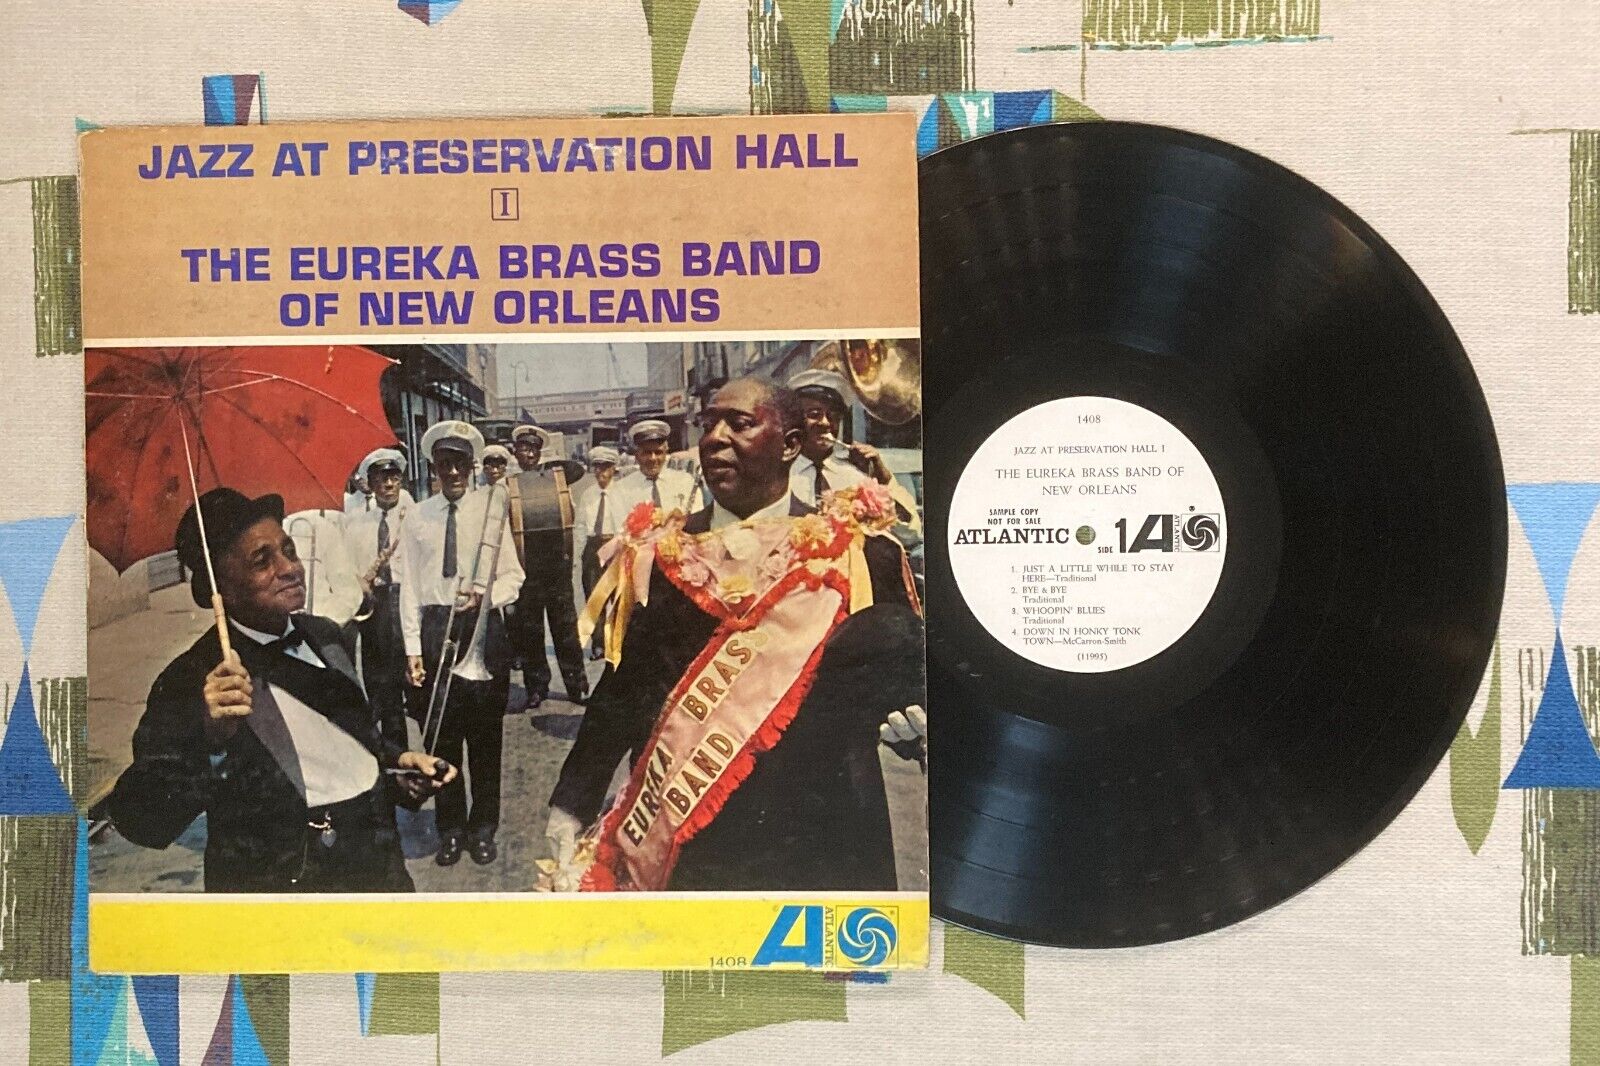 The Eureke Brass Band of New Orleans LP Jazz at Preservation Hall 1963 VG+/VG++